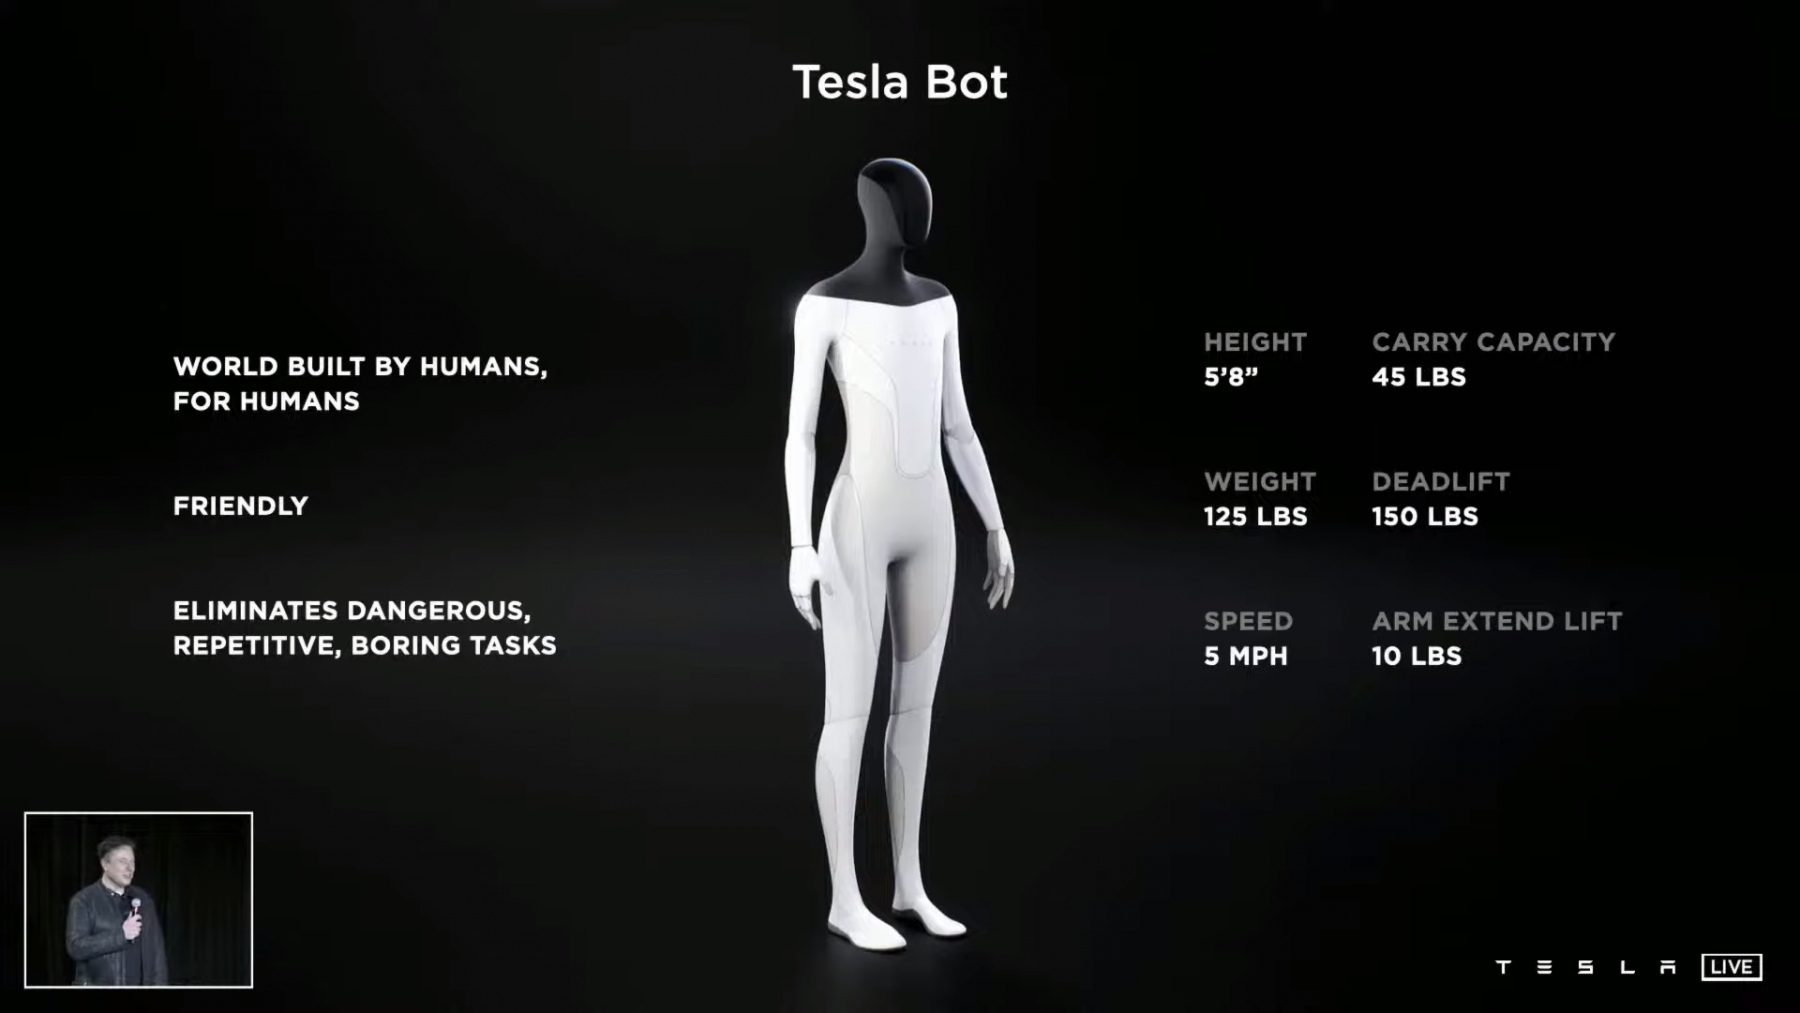 Screenshot from Tesla's AI Day broadcast with information about the Tesla Bot. Credit: CNET Youtube/Tesla